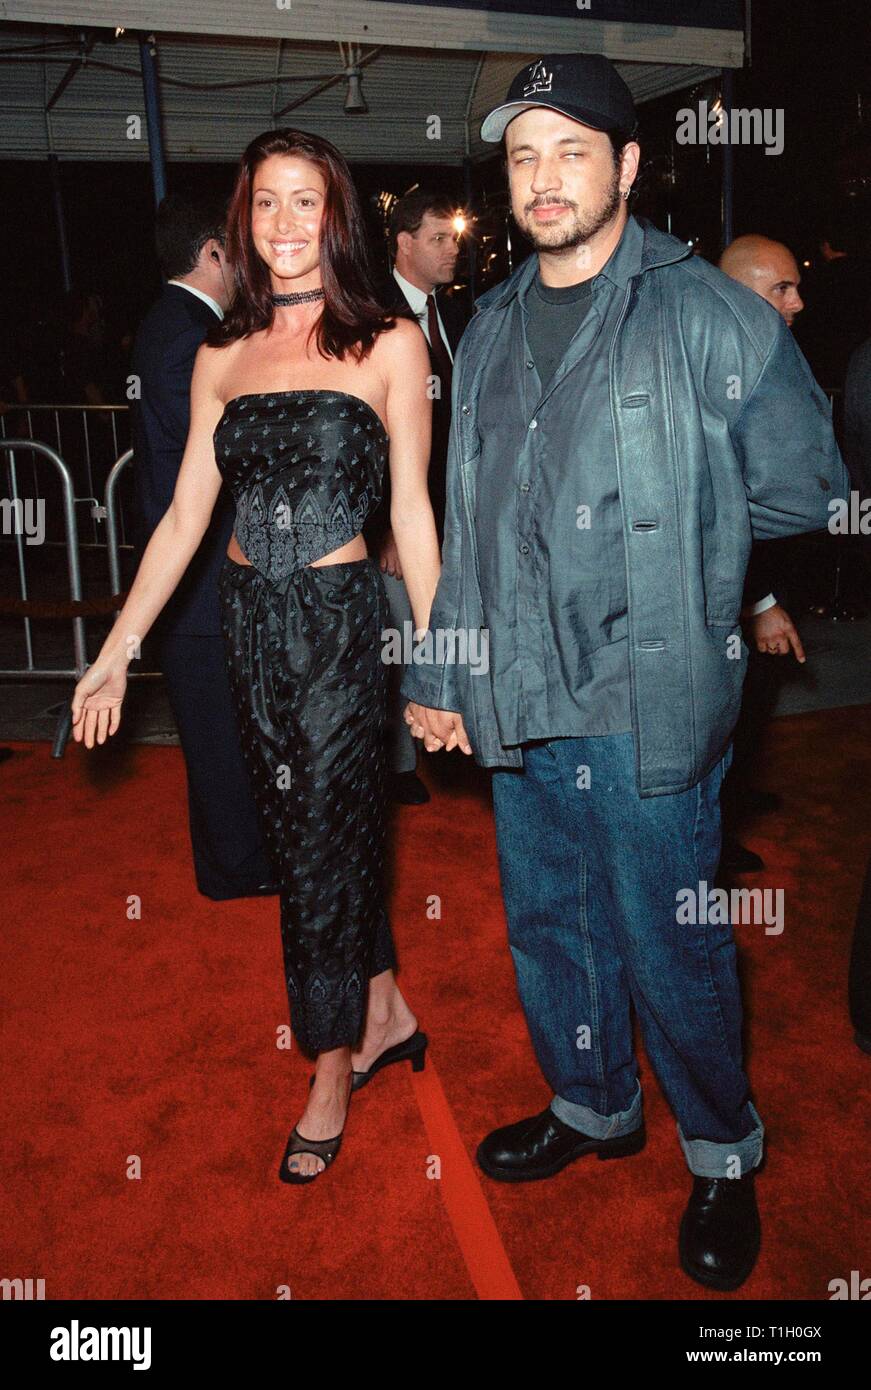 LOS ANGELES, CA. September 27, 1999:  Actress Shannon Elizabeth & boyfriend at the world premiere, in Los Angeles, of 'Three Kings' which stars George Clooney. © Paul Smith / Featureflash Stock Photo